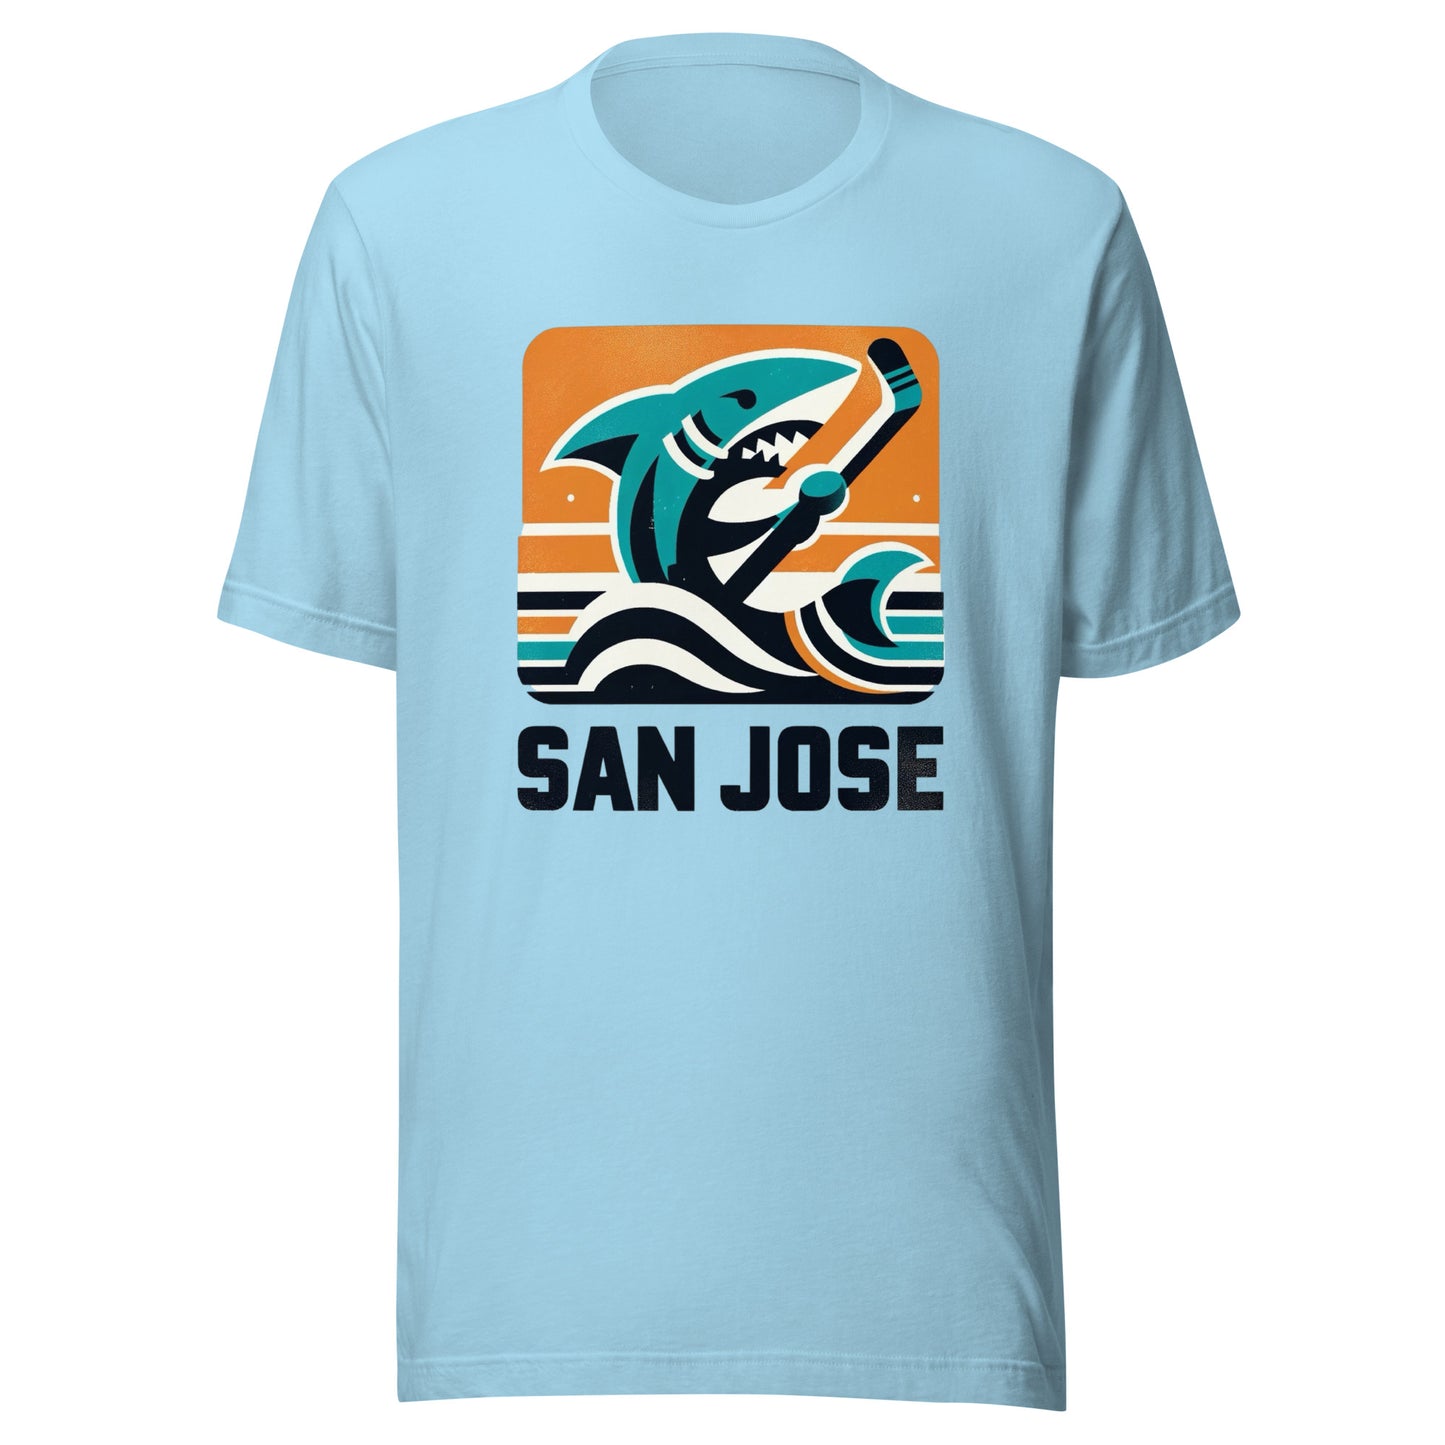 San Jose Rink Roots: The Urban Vintage Hockey Collection Unisex t-shirt